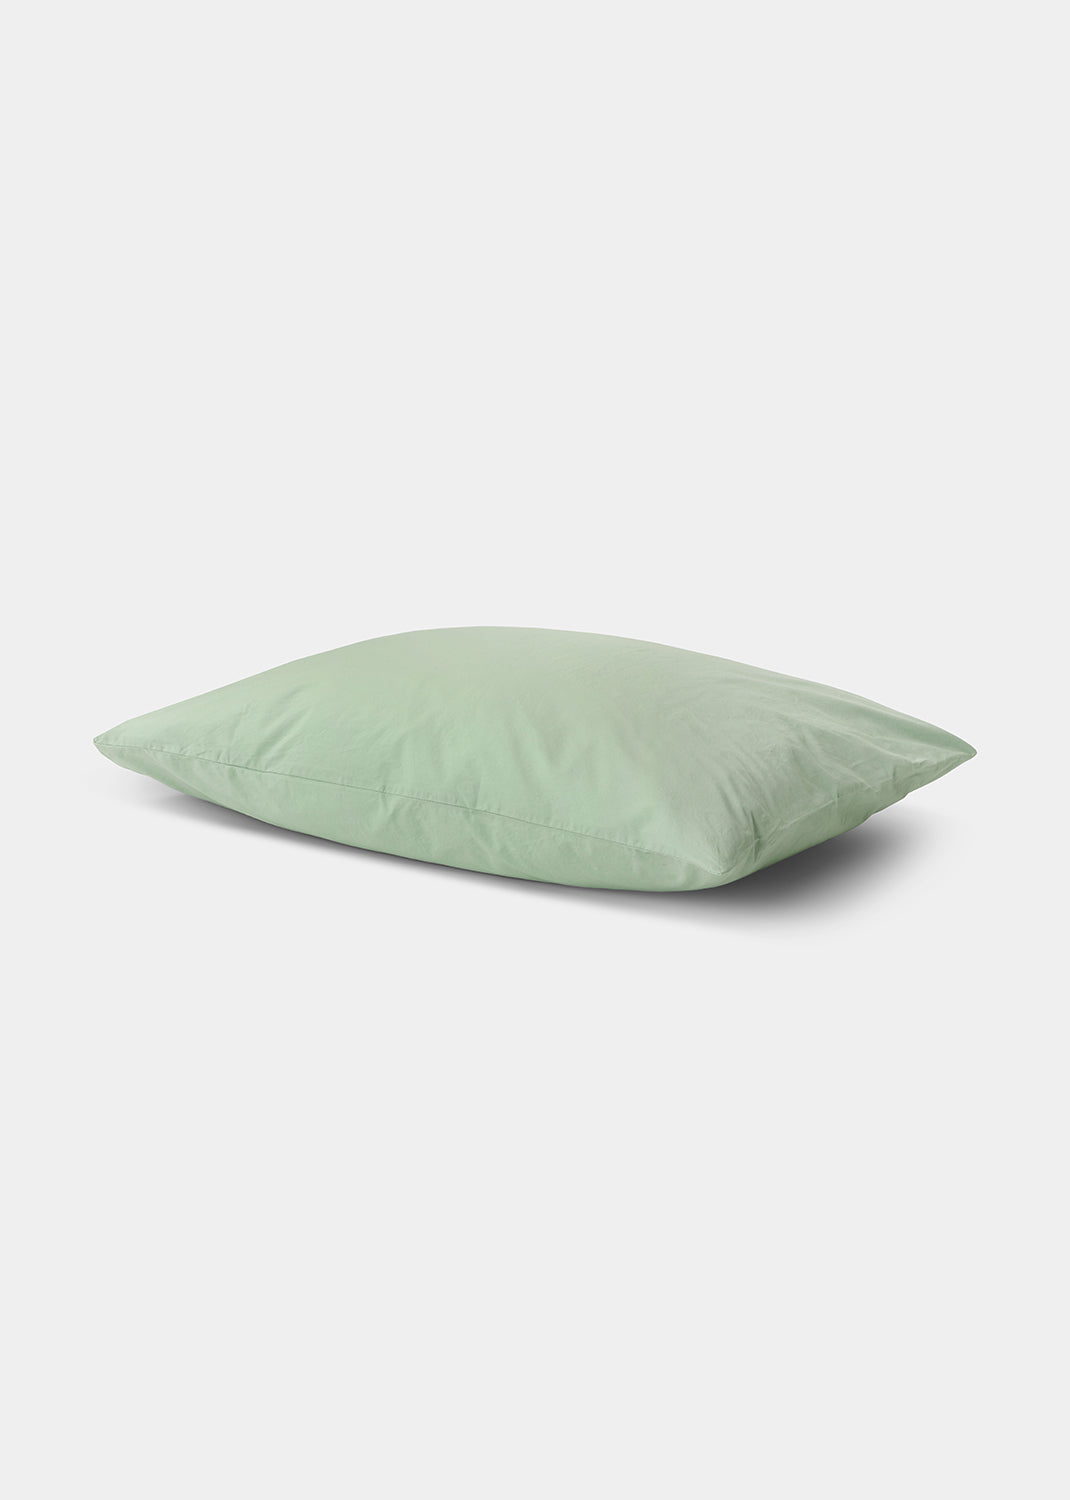 Sekan Studio Cotton Percale Bed Set - Green